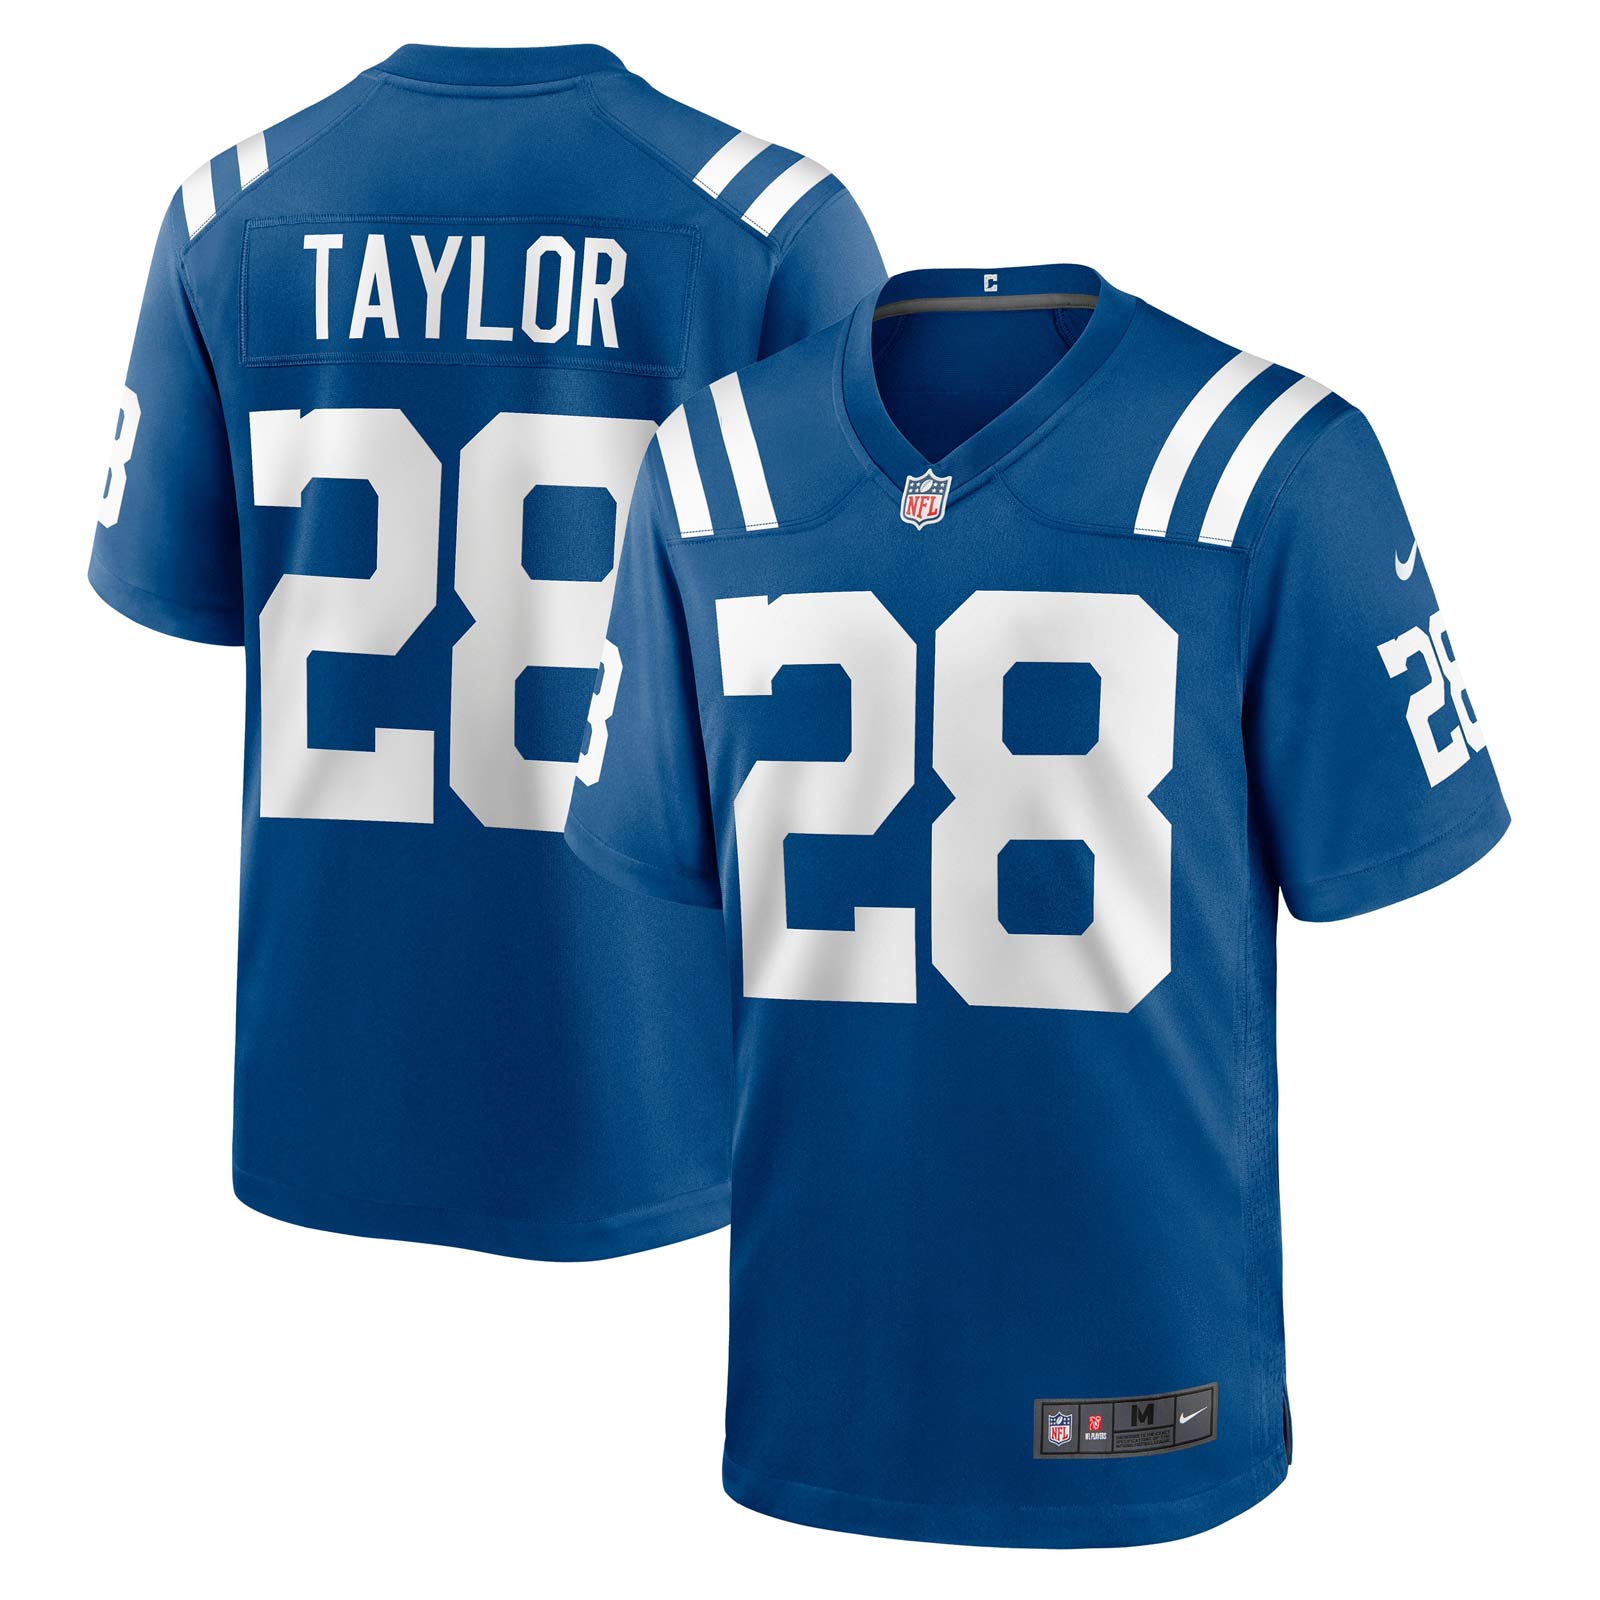 NIKE INDIANAPOLIS COLTS TAYLOR 28 HOME JERSEY